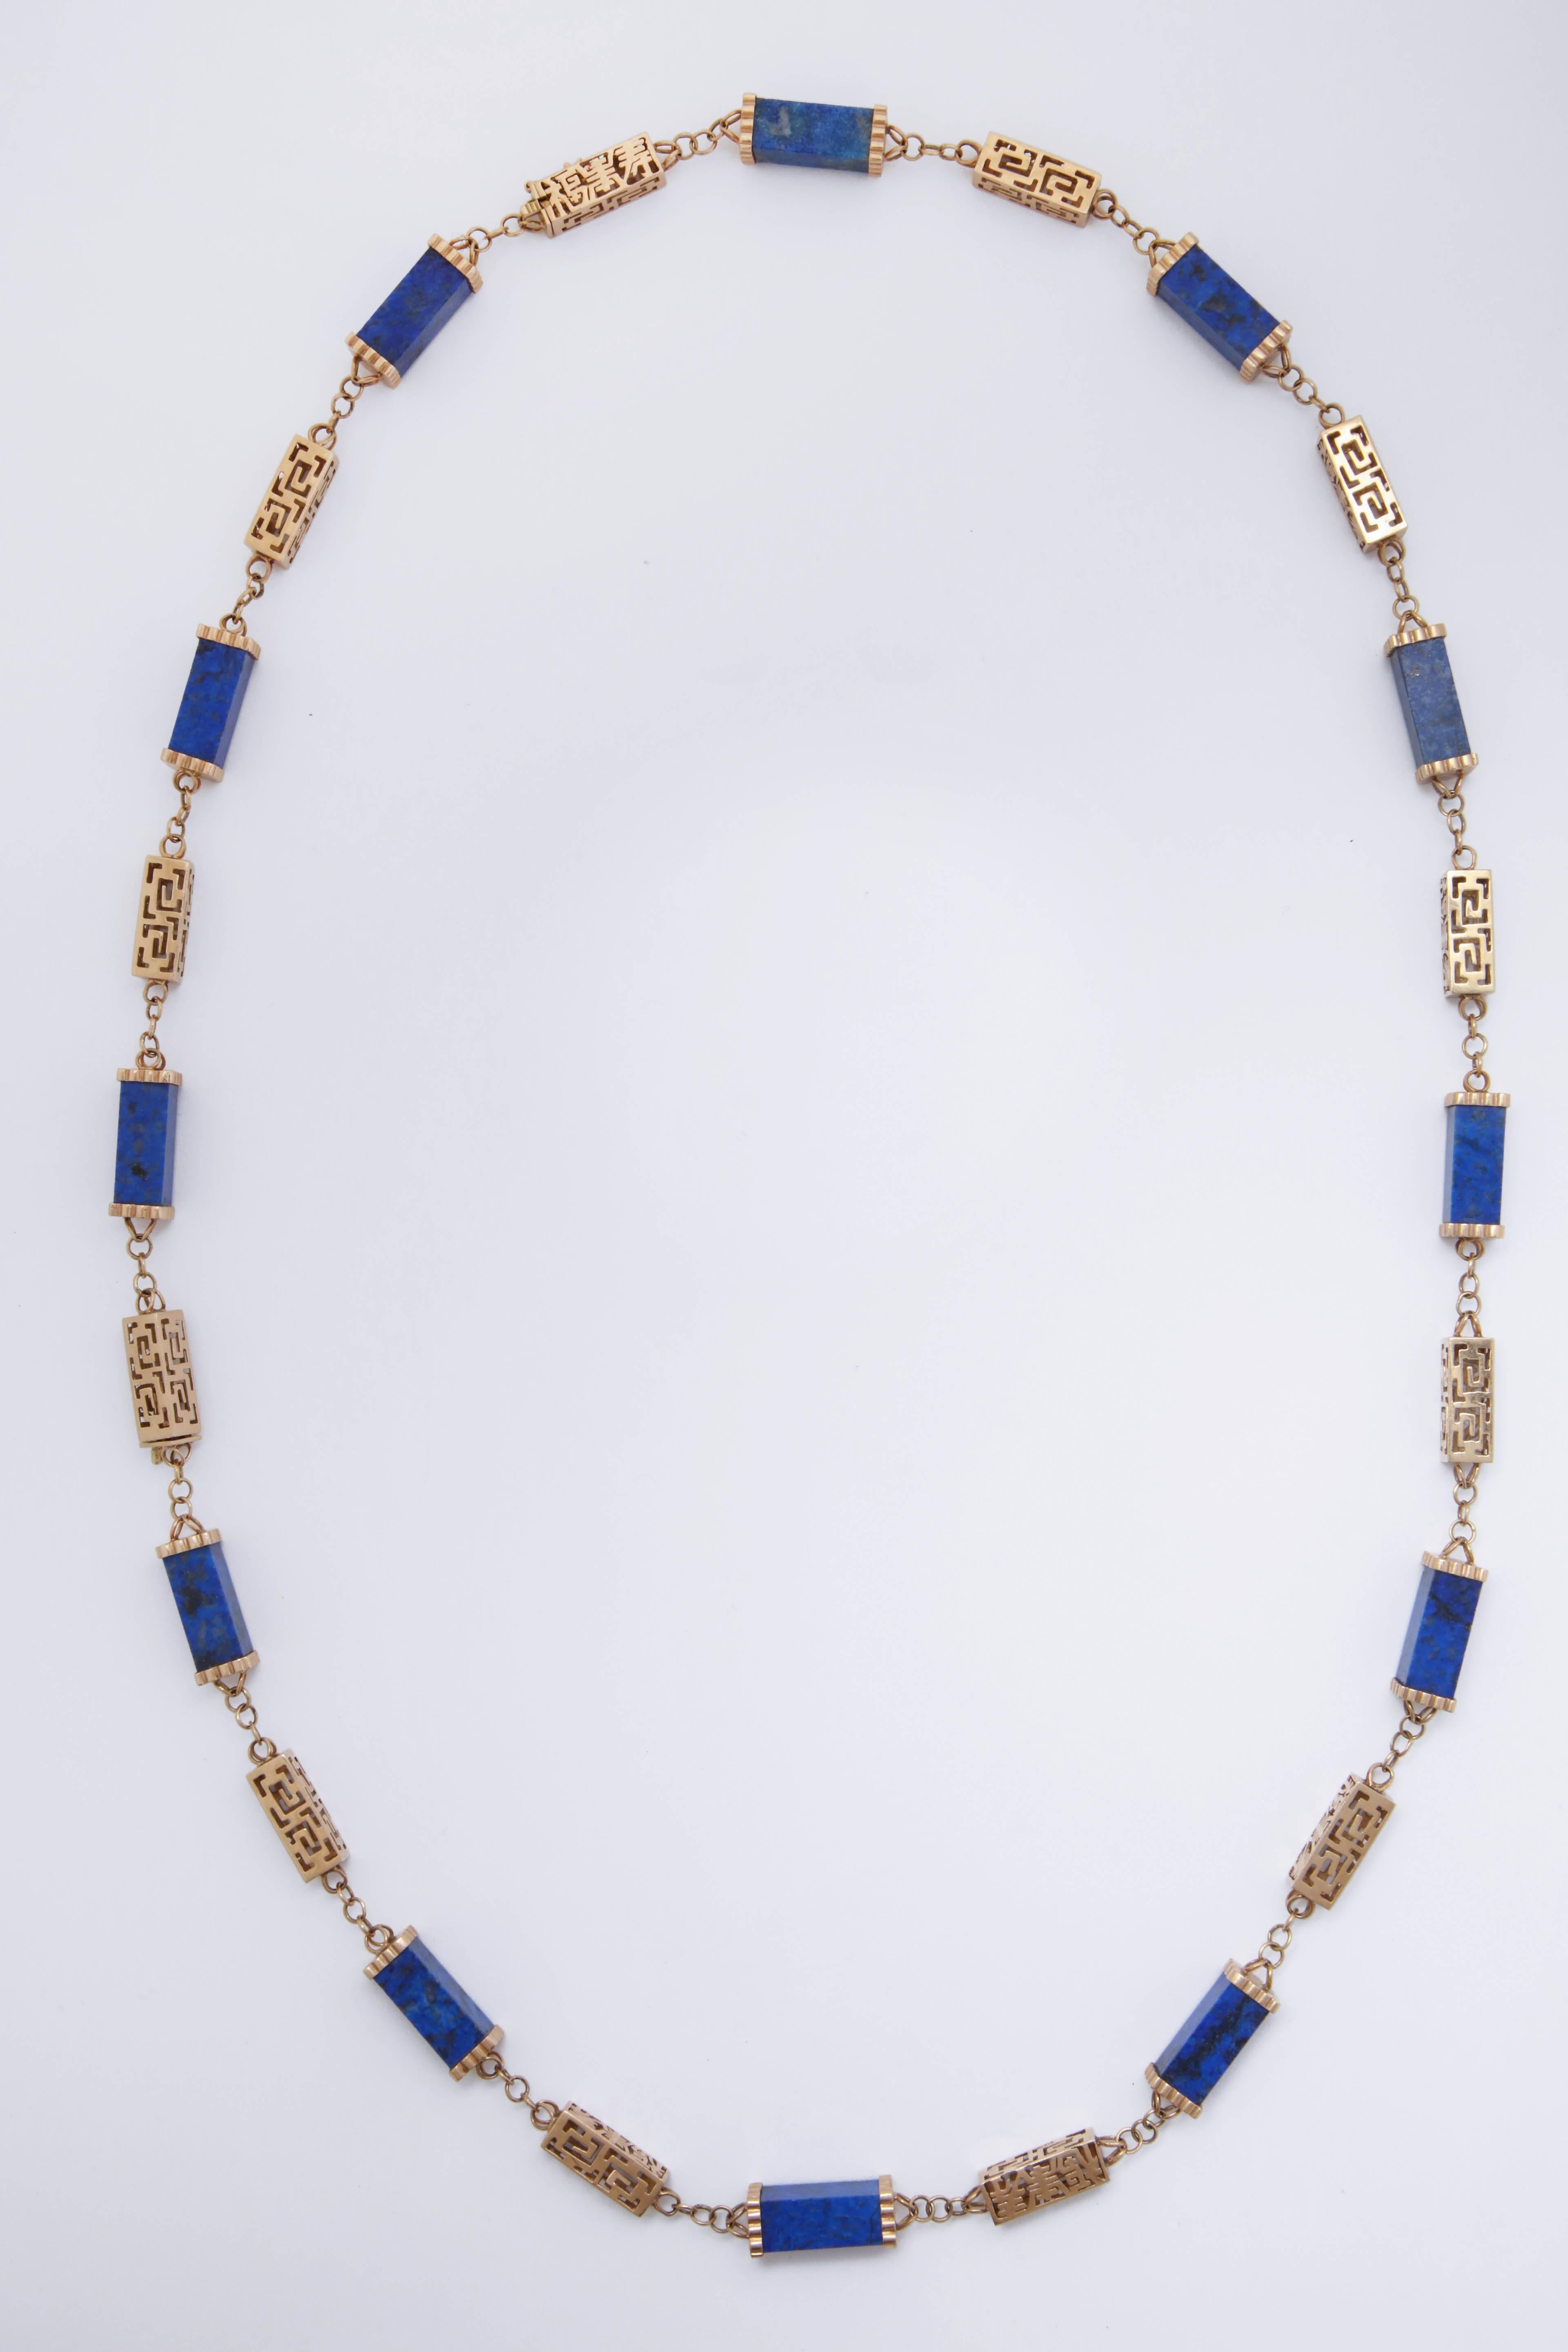 Women's 1950s Three Dimensional Cylinder Shape Lapis Lazuli and Reticulated Gold Chain